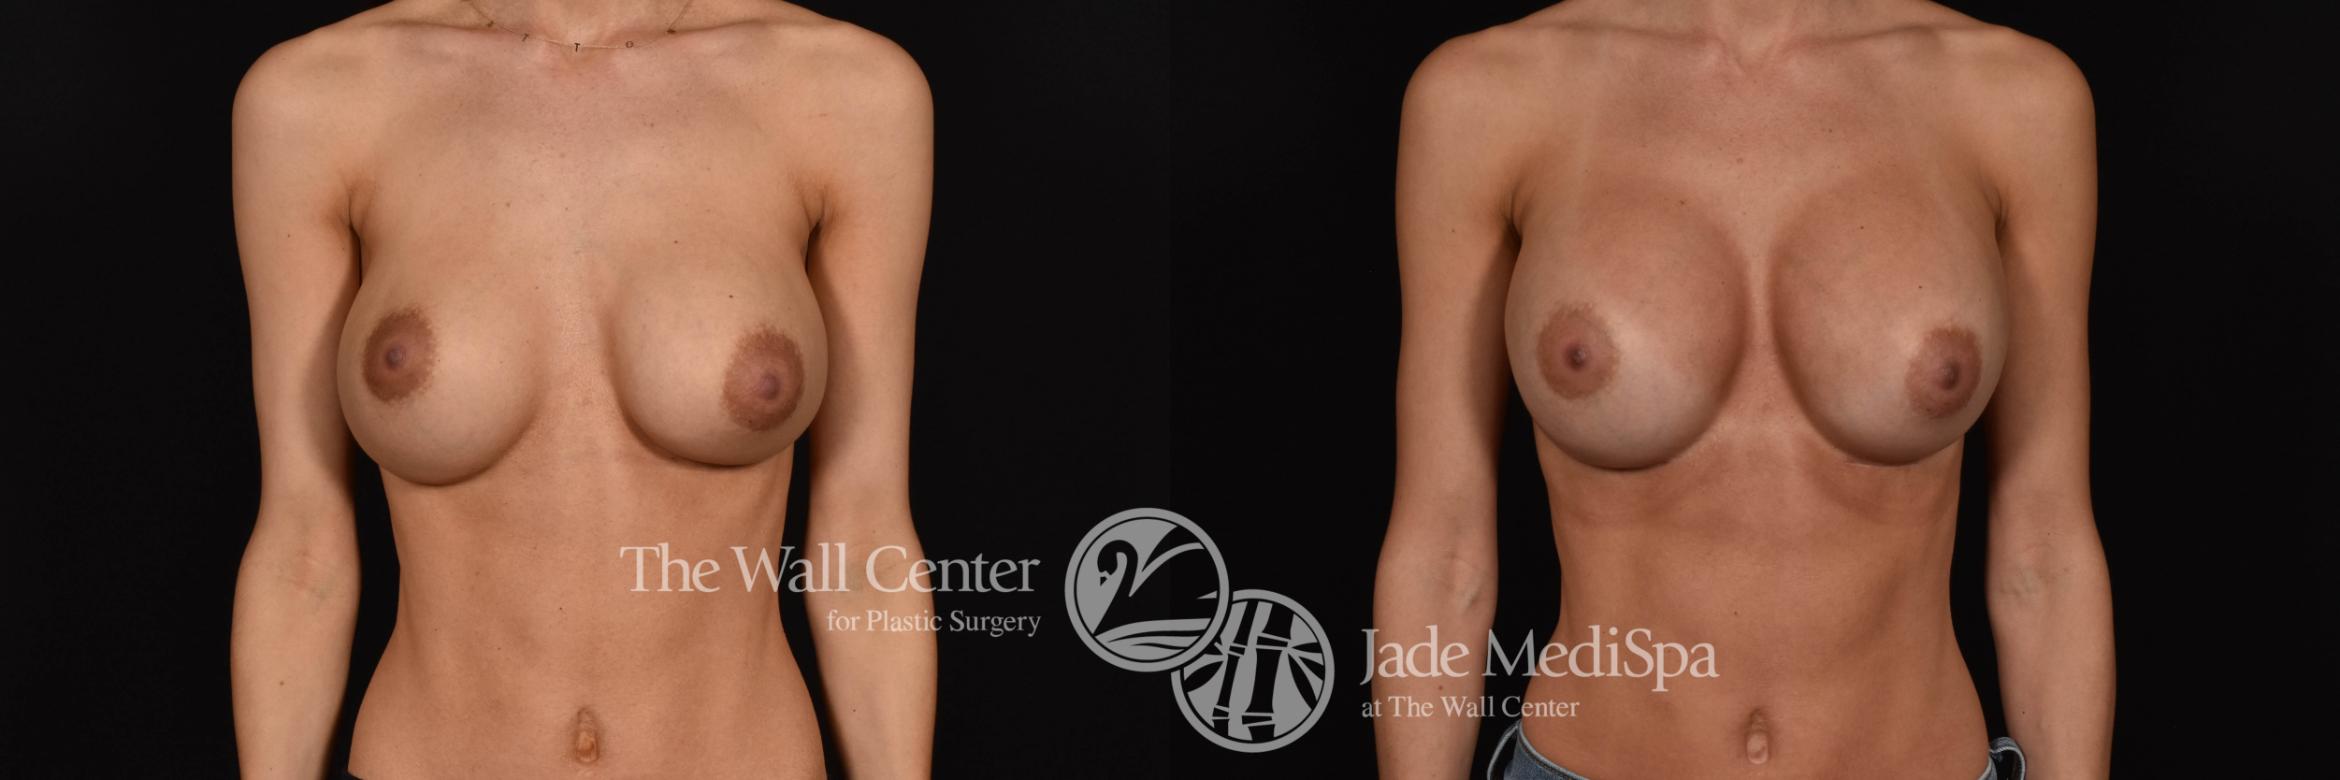 Breast Implant Exchange Front Photo, Shreveport, Louisiana, The Wall Center for Plastic Surgery, Case 880